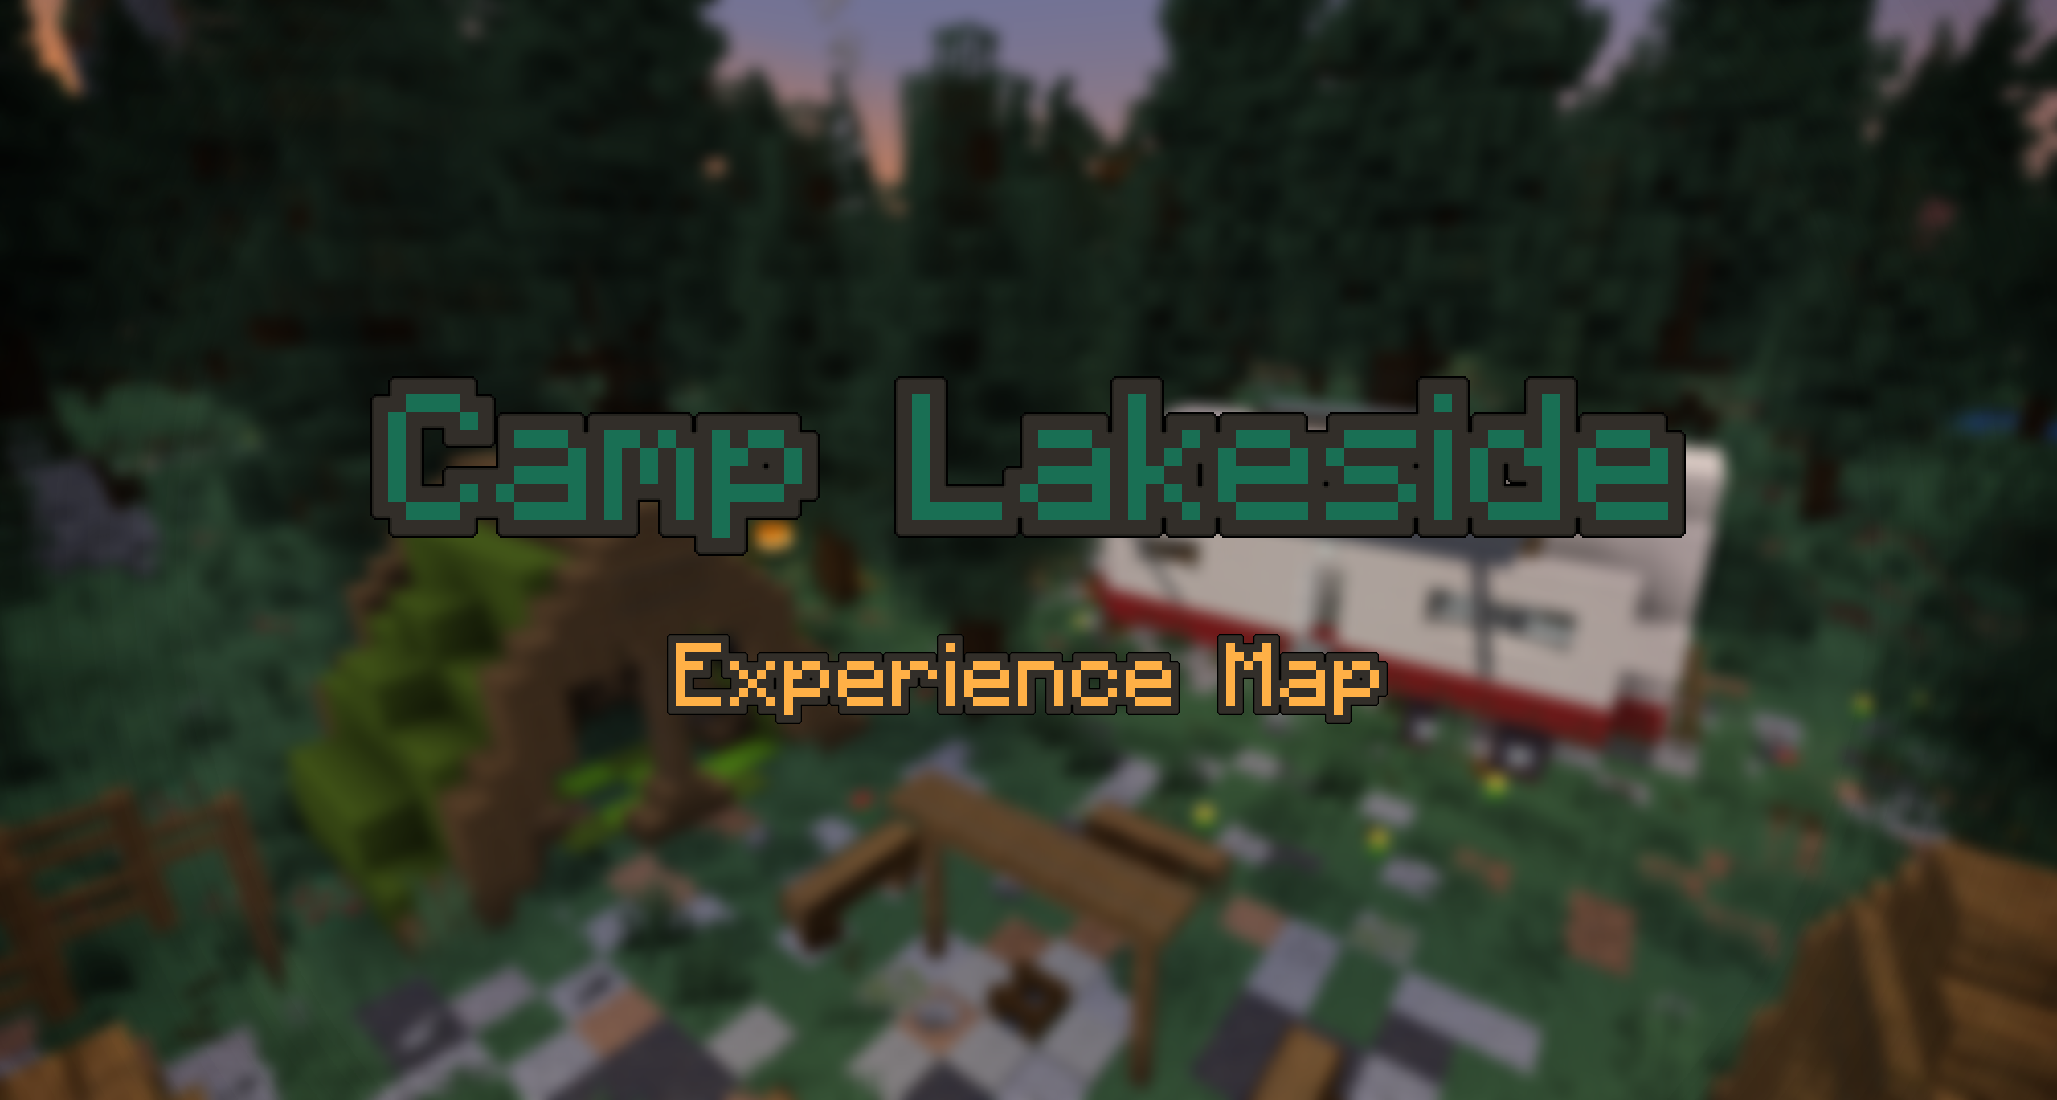 The logo for Camp Lakeside, a Minecraft Map for 1.19.3 by Slender